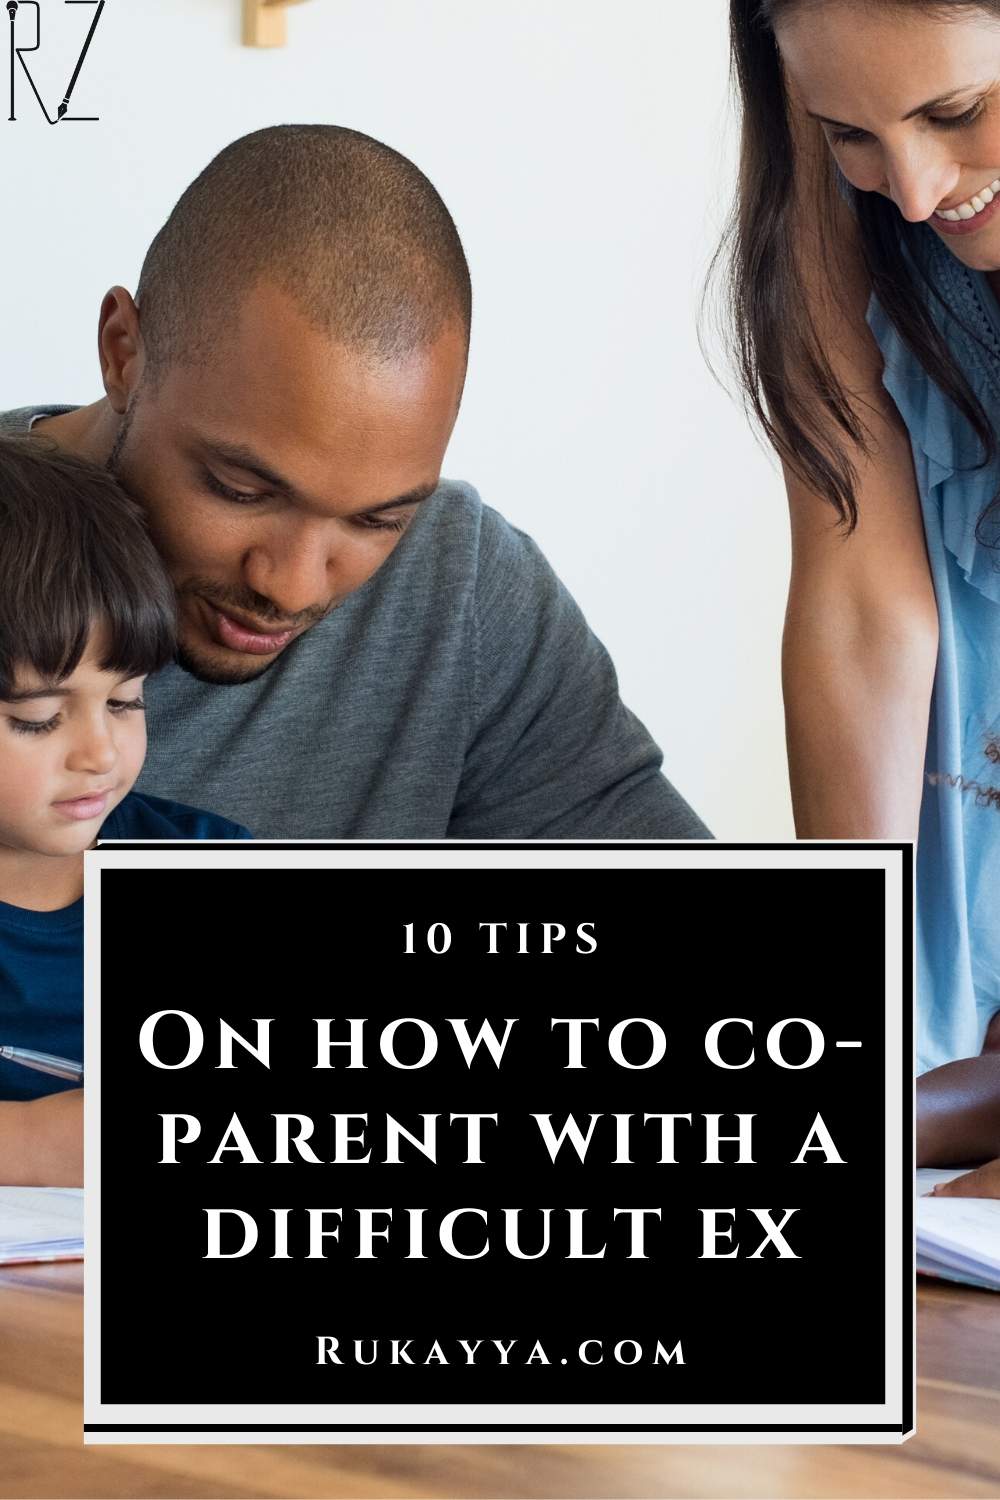 Co-parenting, 10 tips, how to co-parent with a difficult ex